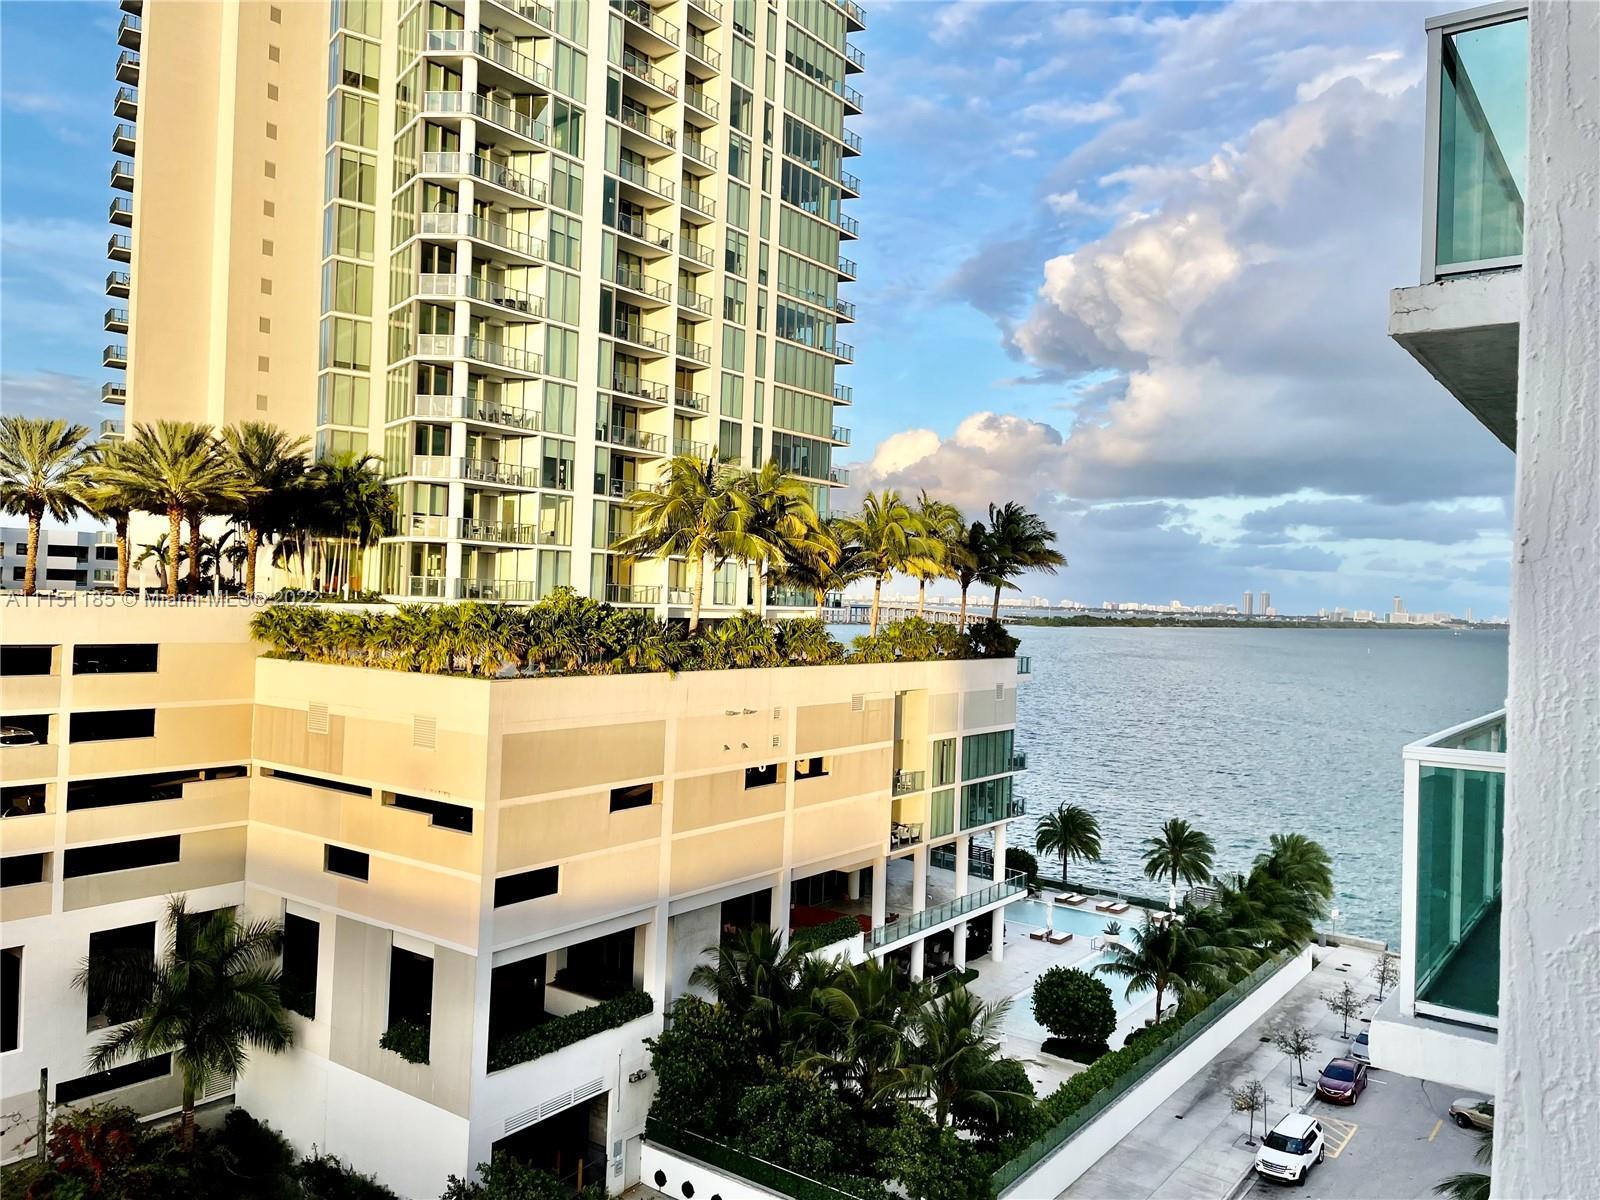 Beautiful tiled condo unit with amazing water view! Other great features include split floorplan, fl